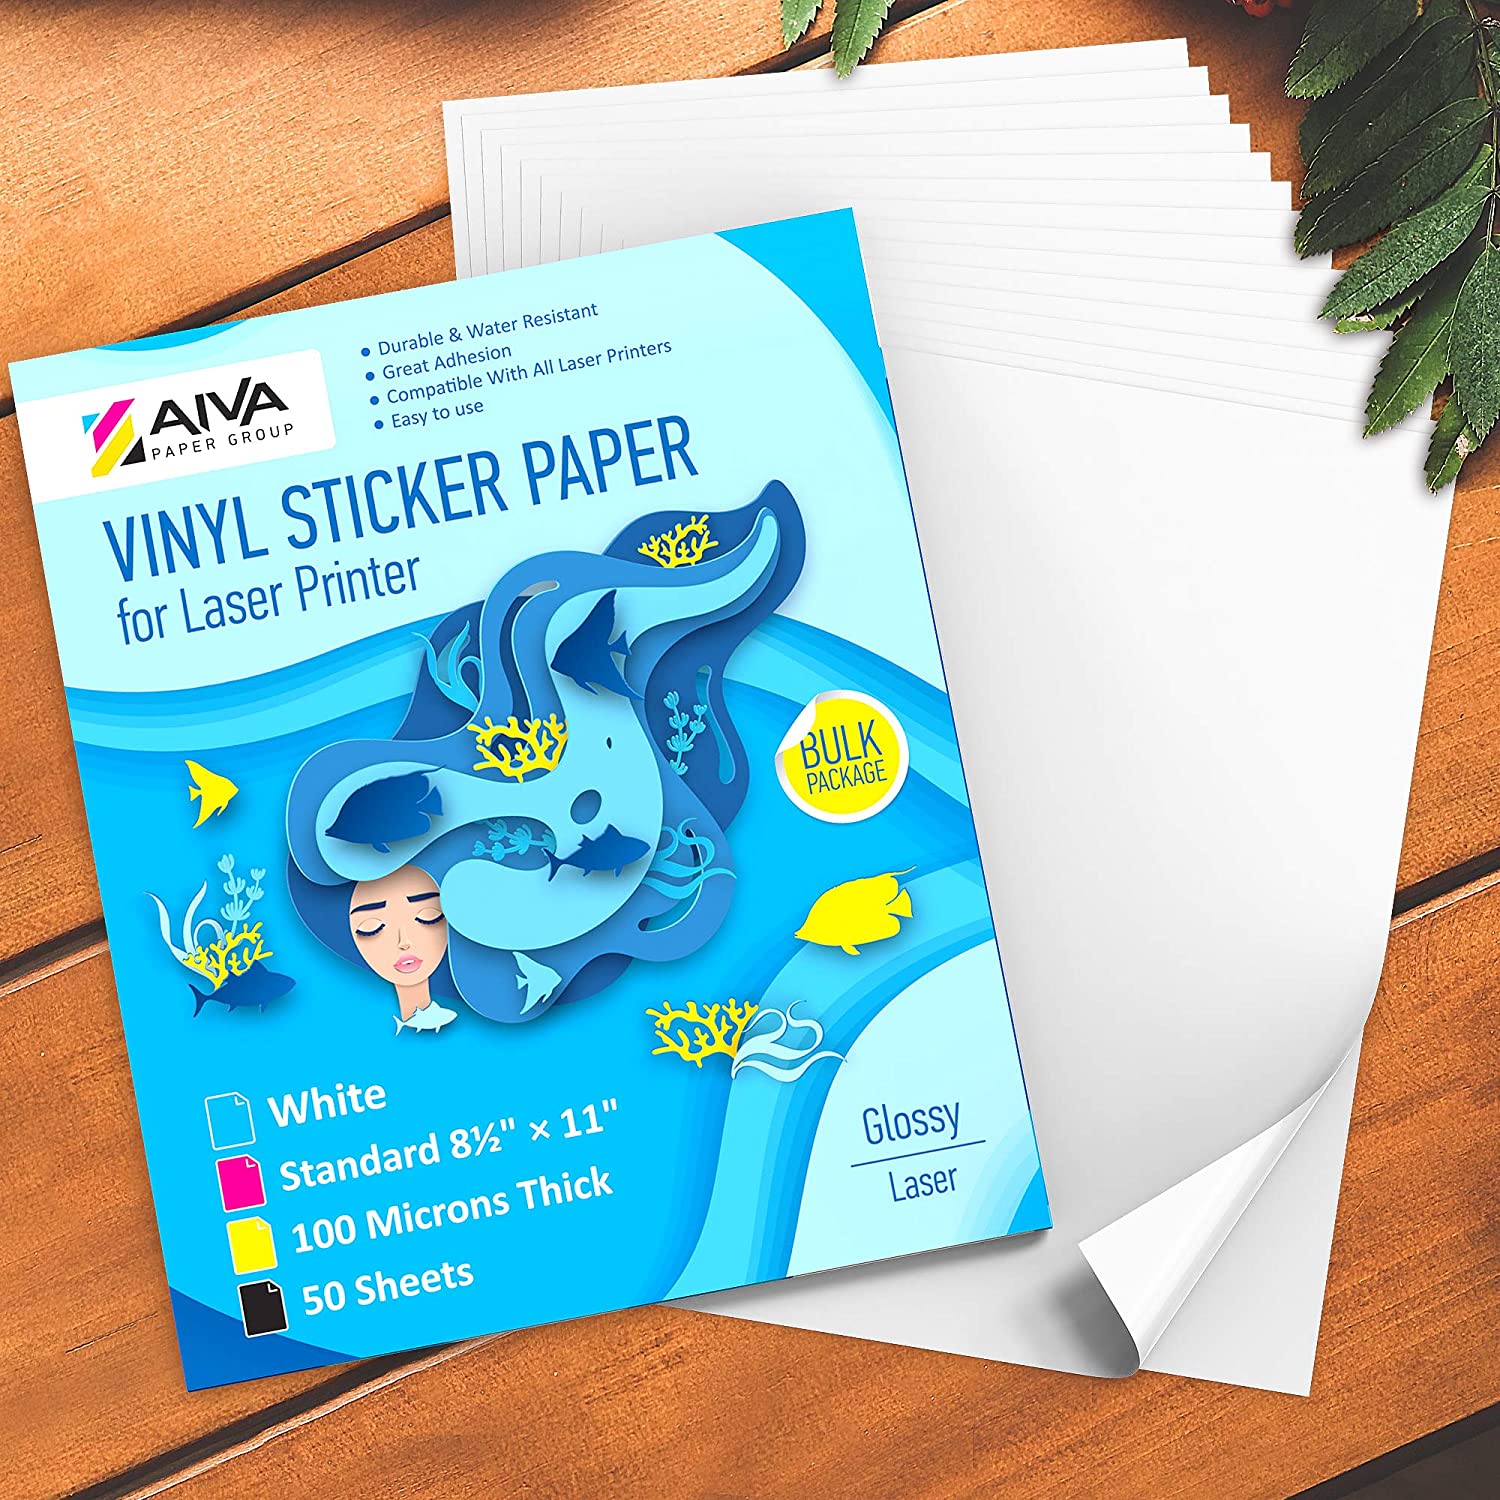 Printable Vinyl Sticker Paper Laser Glossy 50 sheets AIVA Paper Group